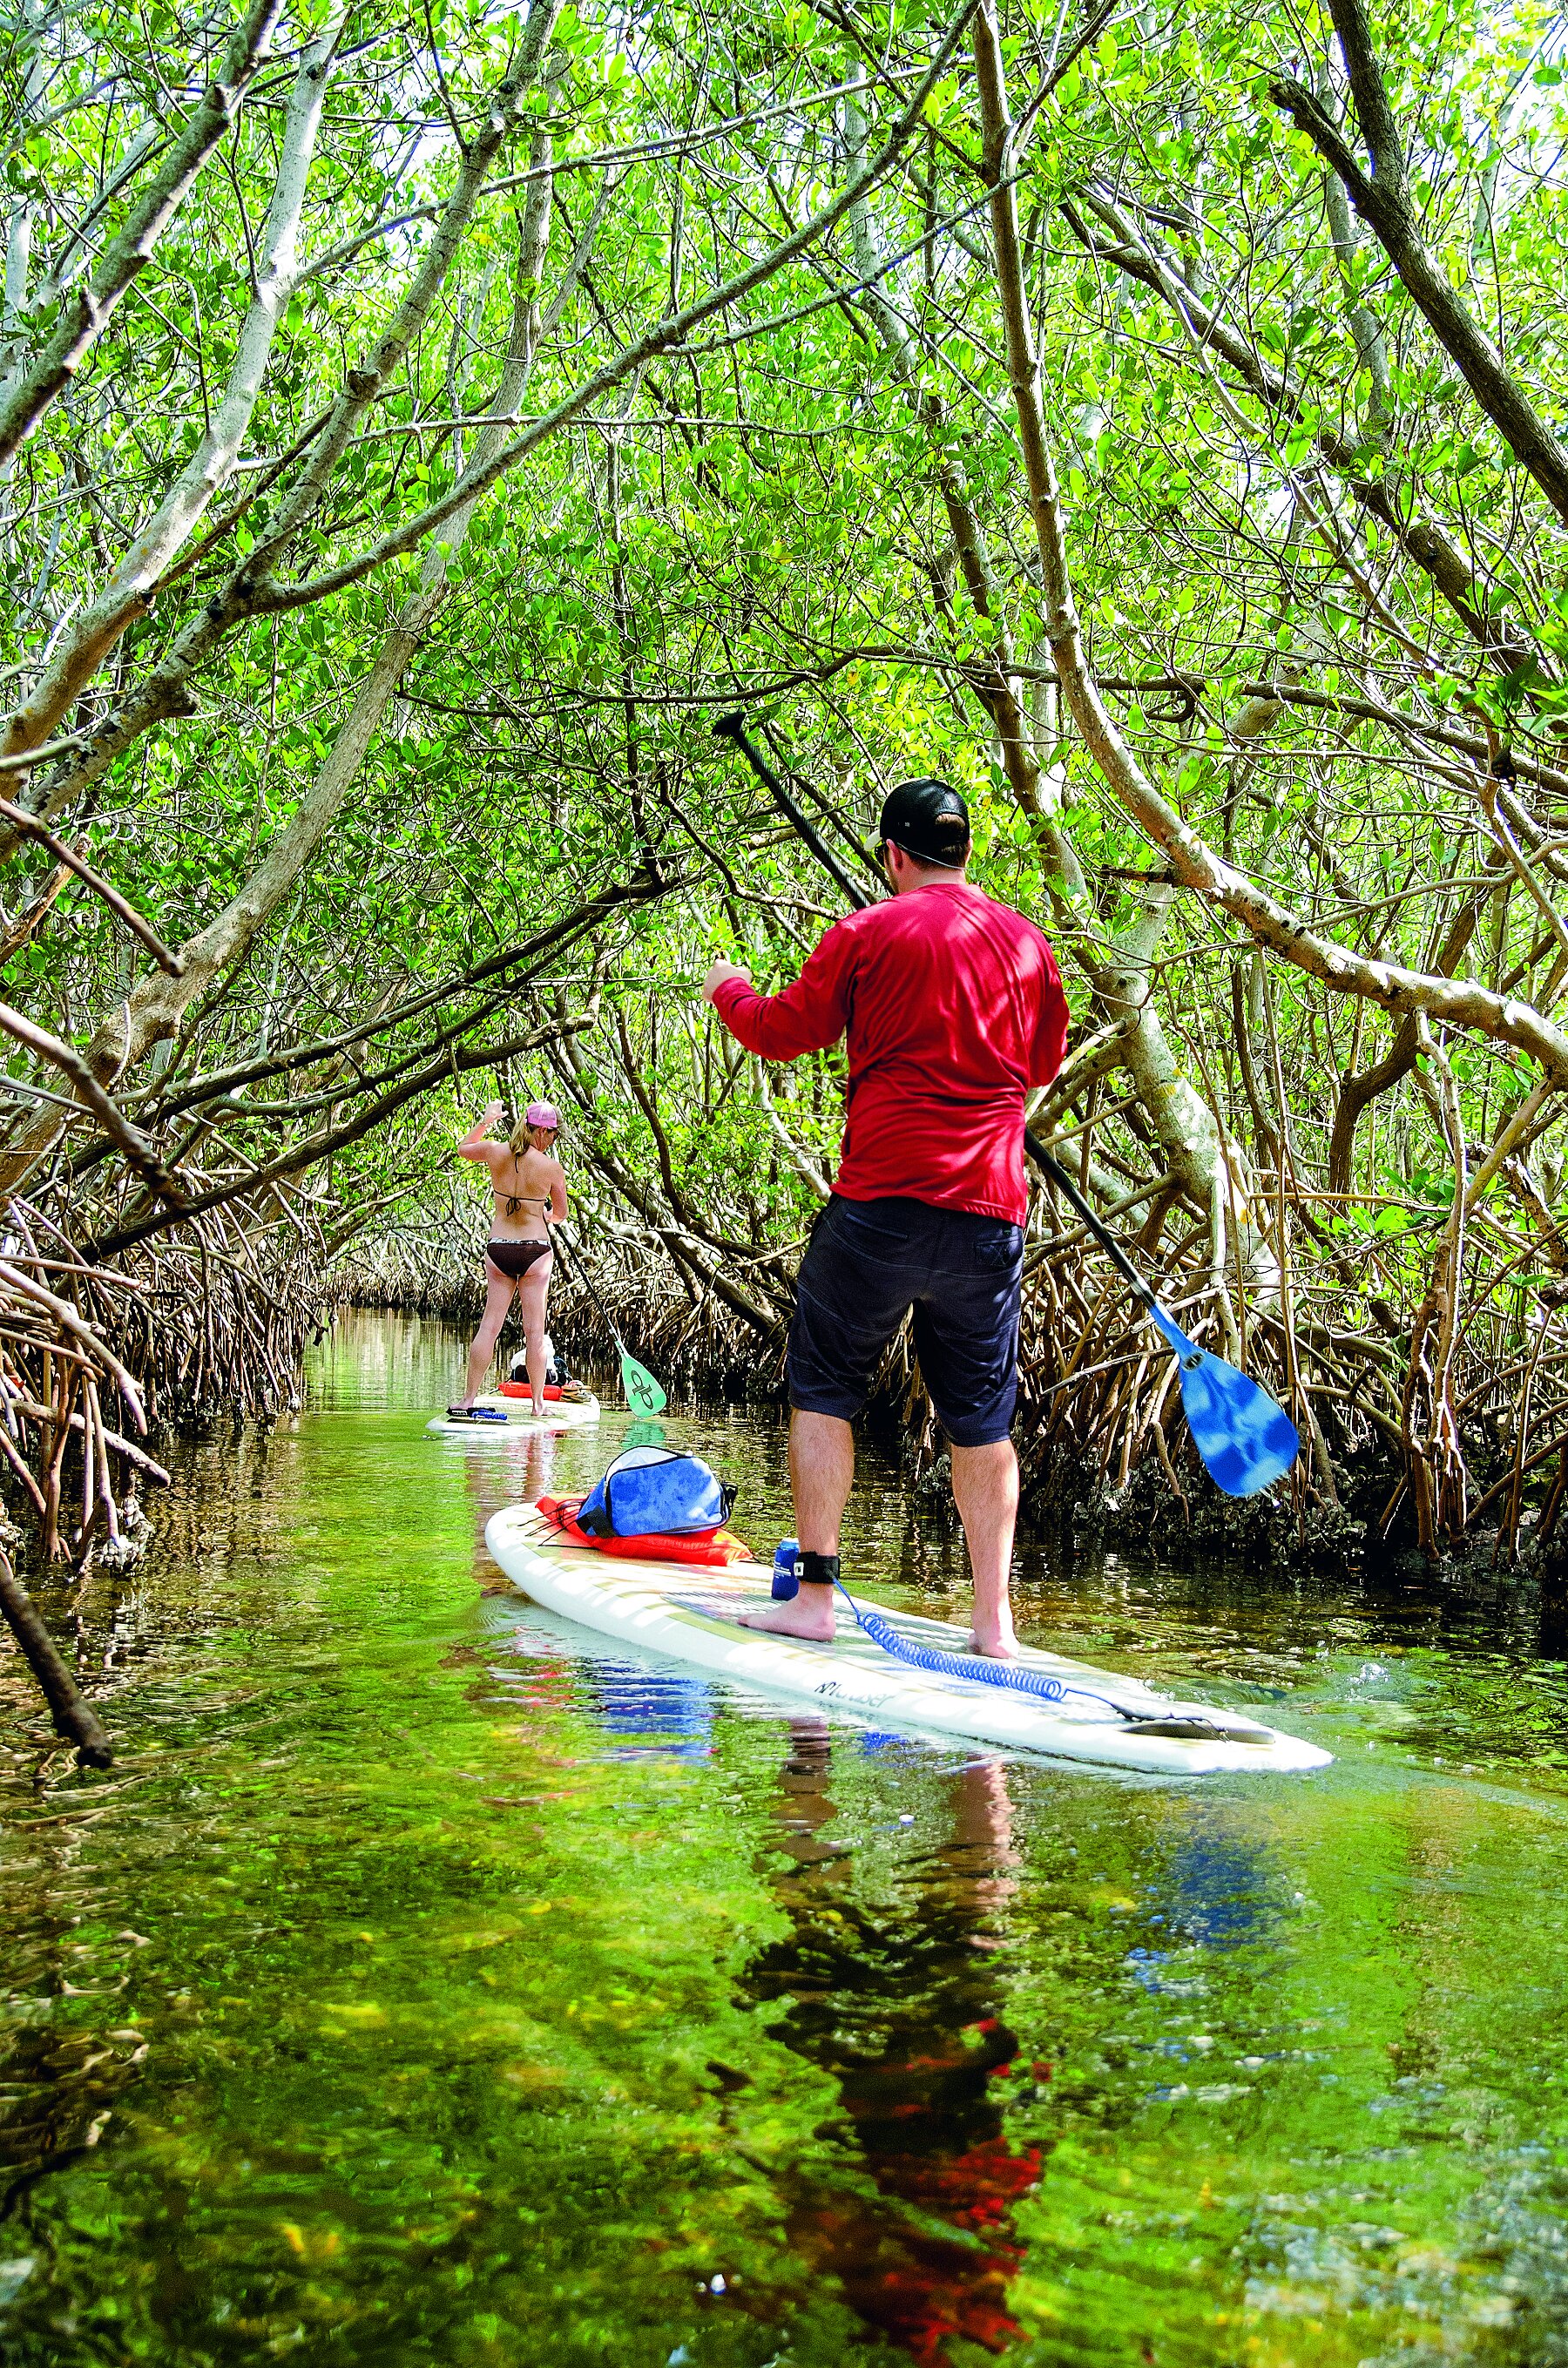 Stand Up Paddleboarding Through Mangroves at Weedon Island - St. Pete.jpg